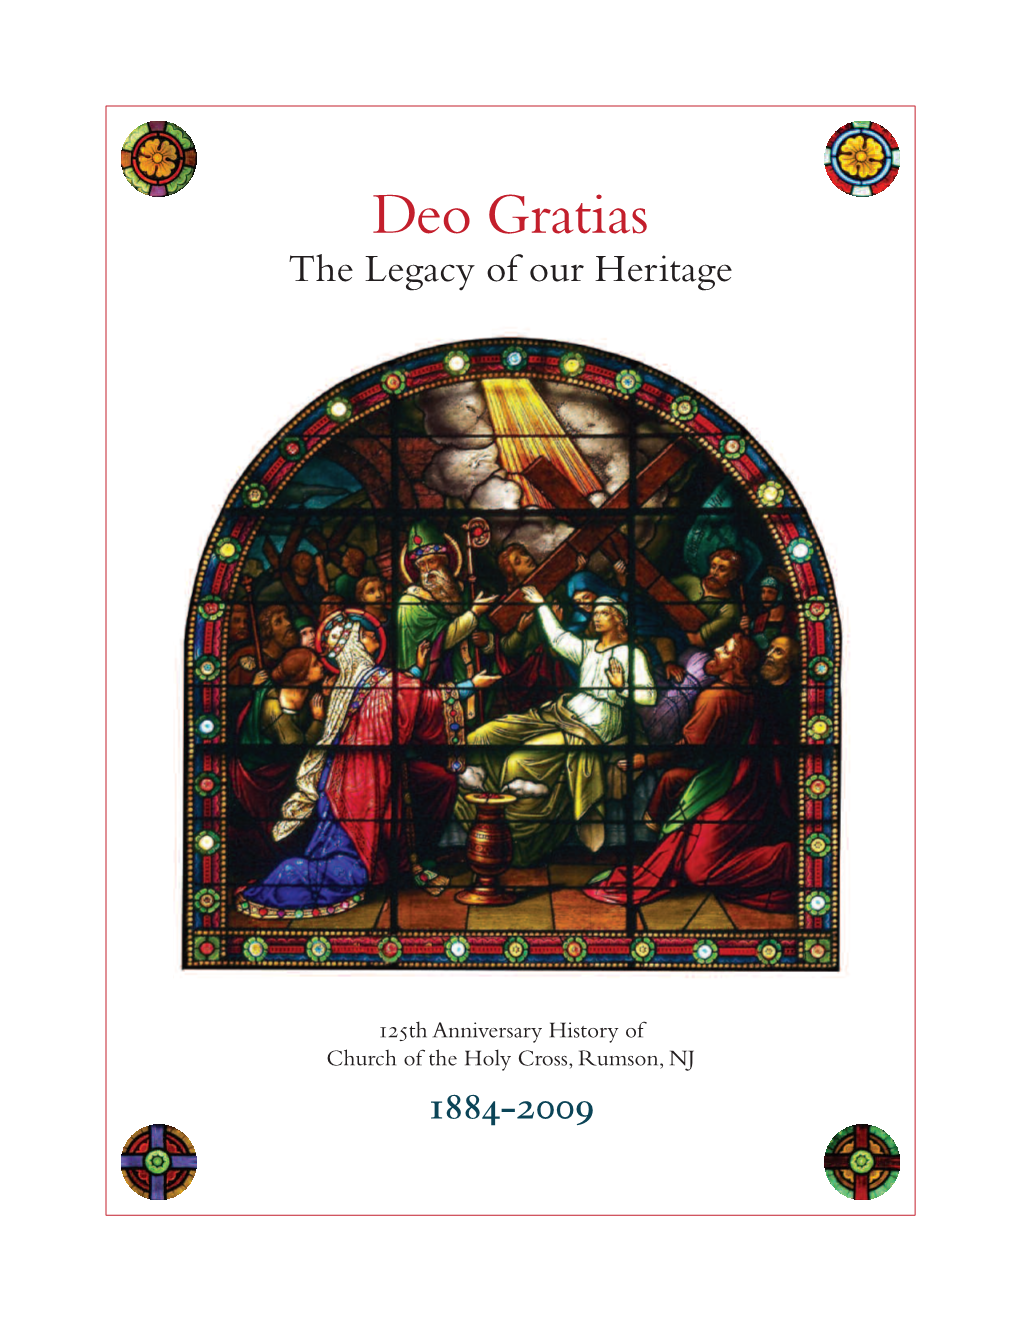 Deo Gratias the Legacy of Our Heritage